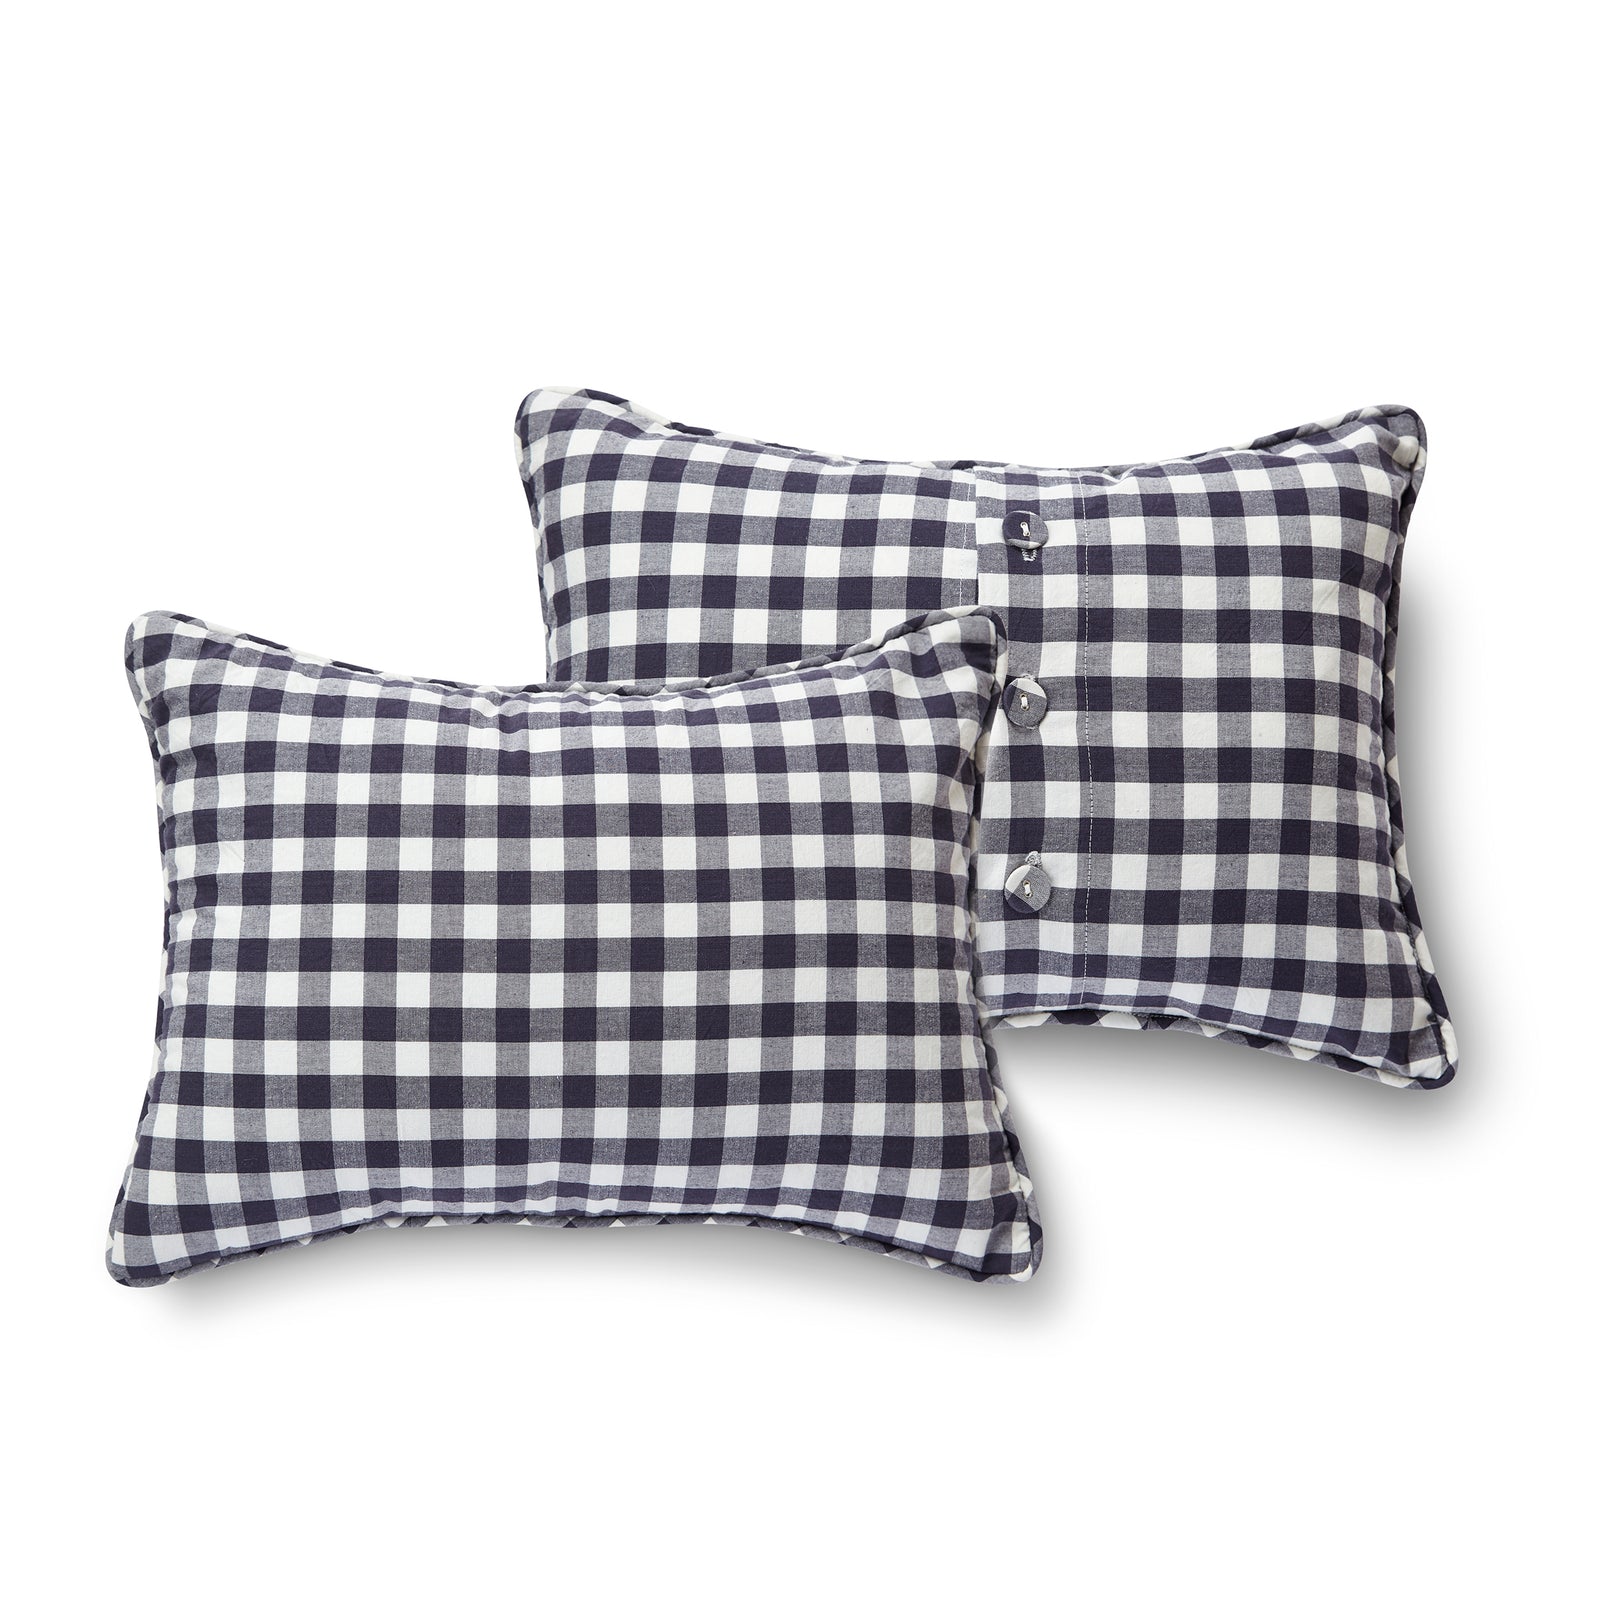 Decor Pillow Cover Pillow Pehr CheckMate Ink Blue  